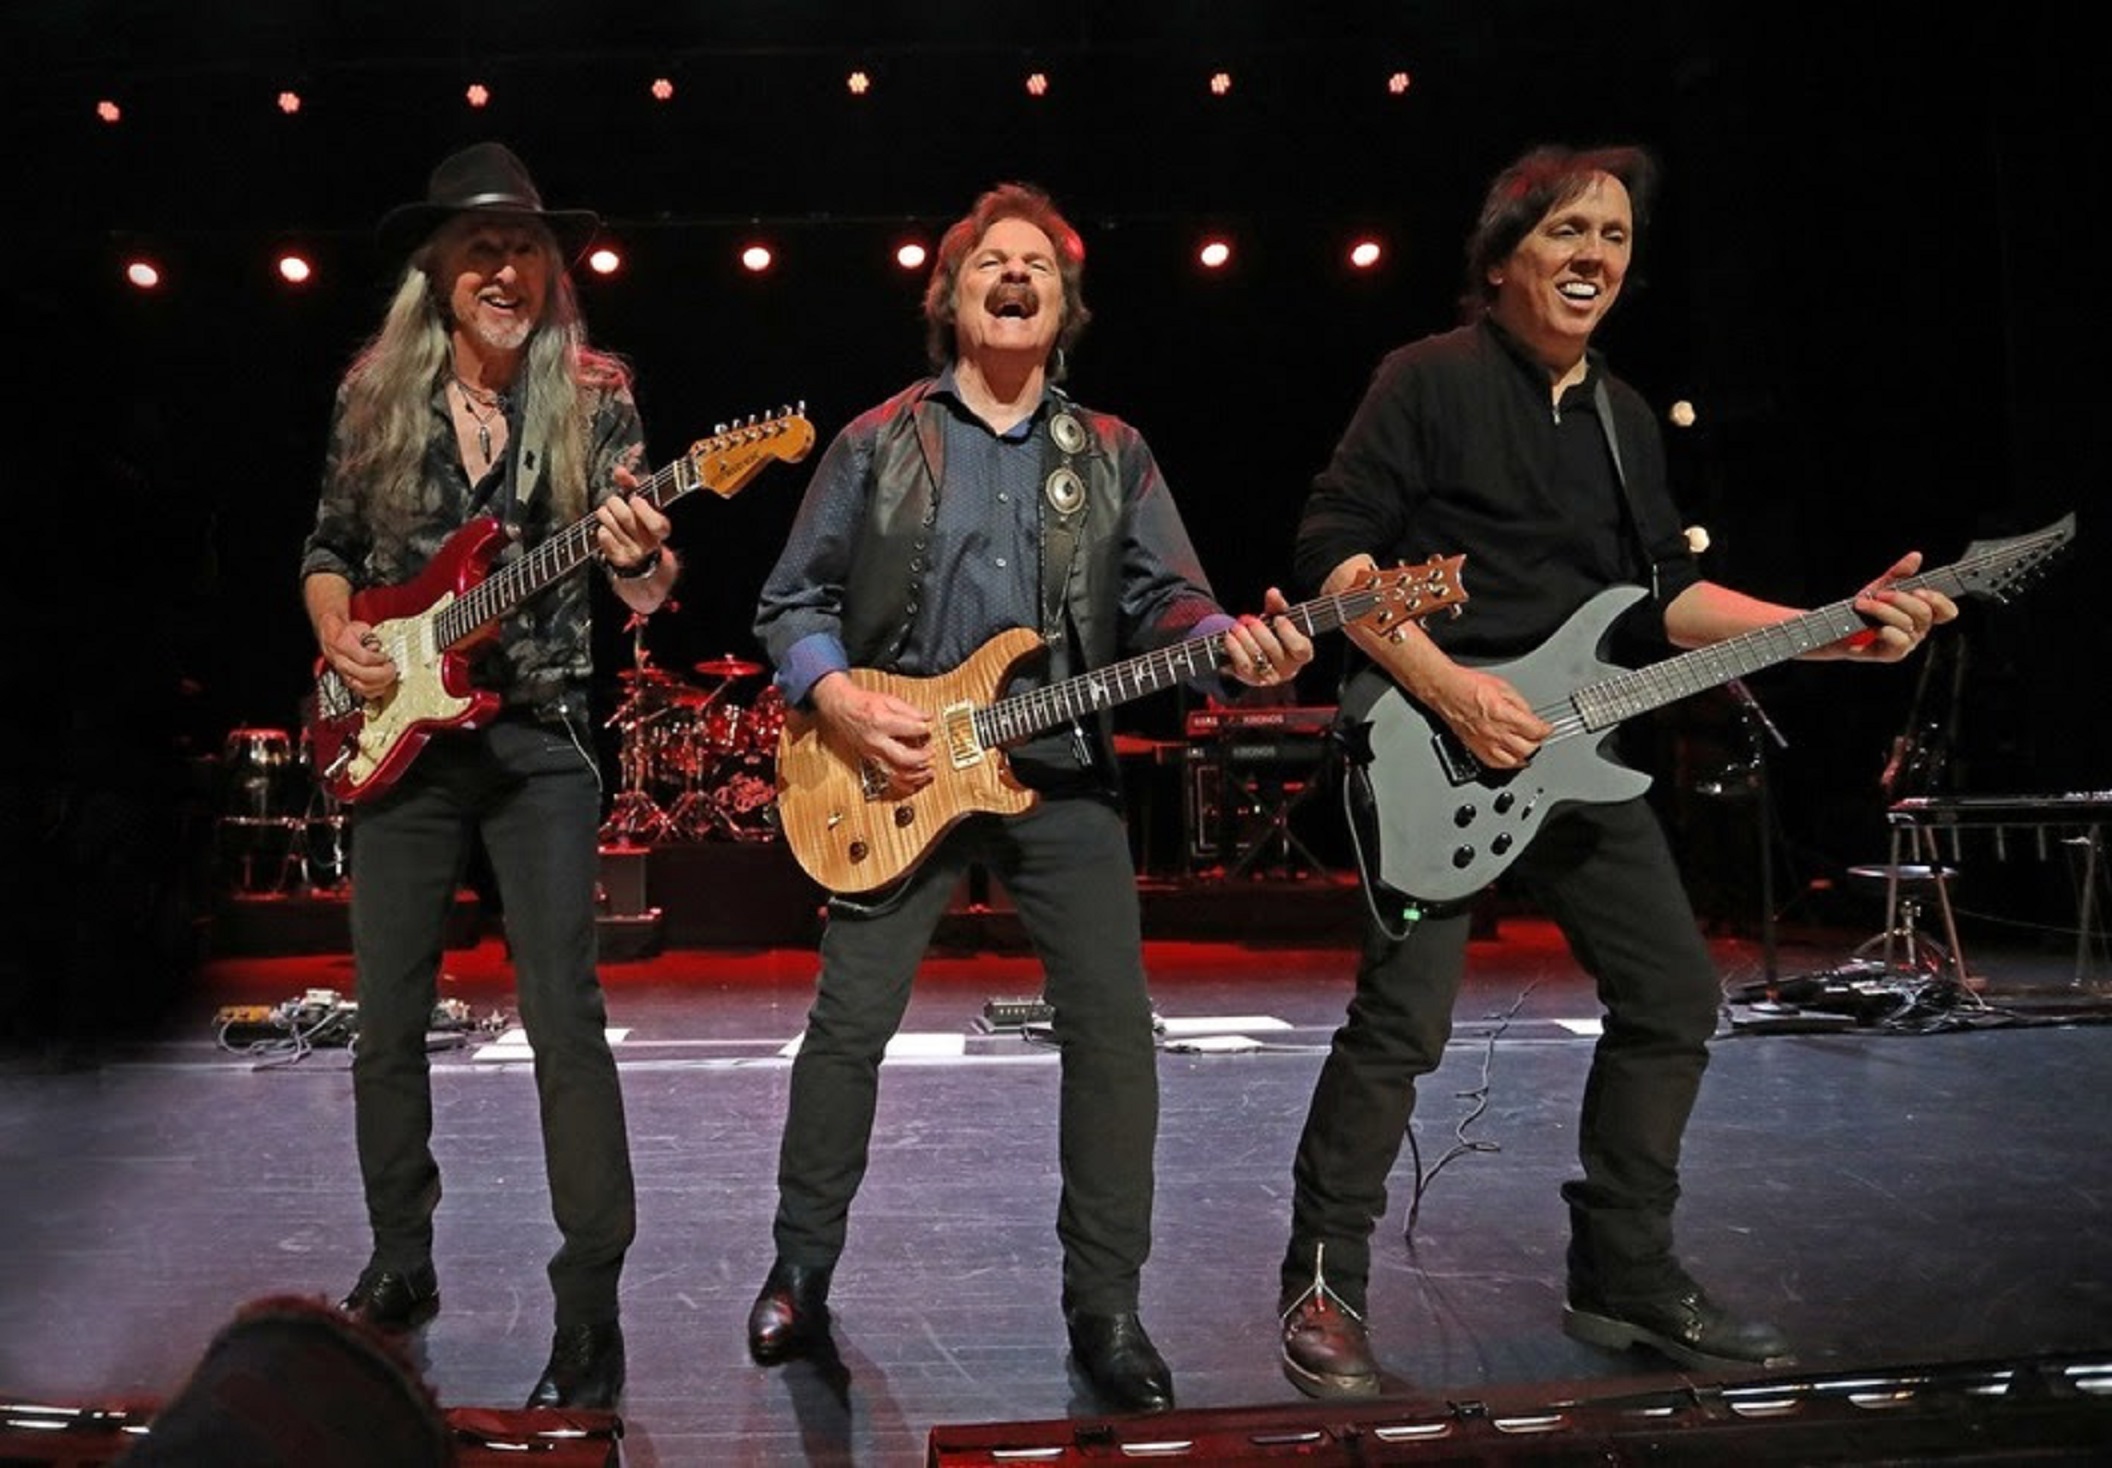 THE DOOBIE BROTHERS LIVE FROM THE BEACON THEATRE Premieres June 2019 on PBS Stations